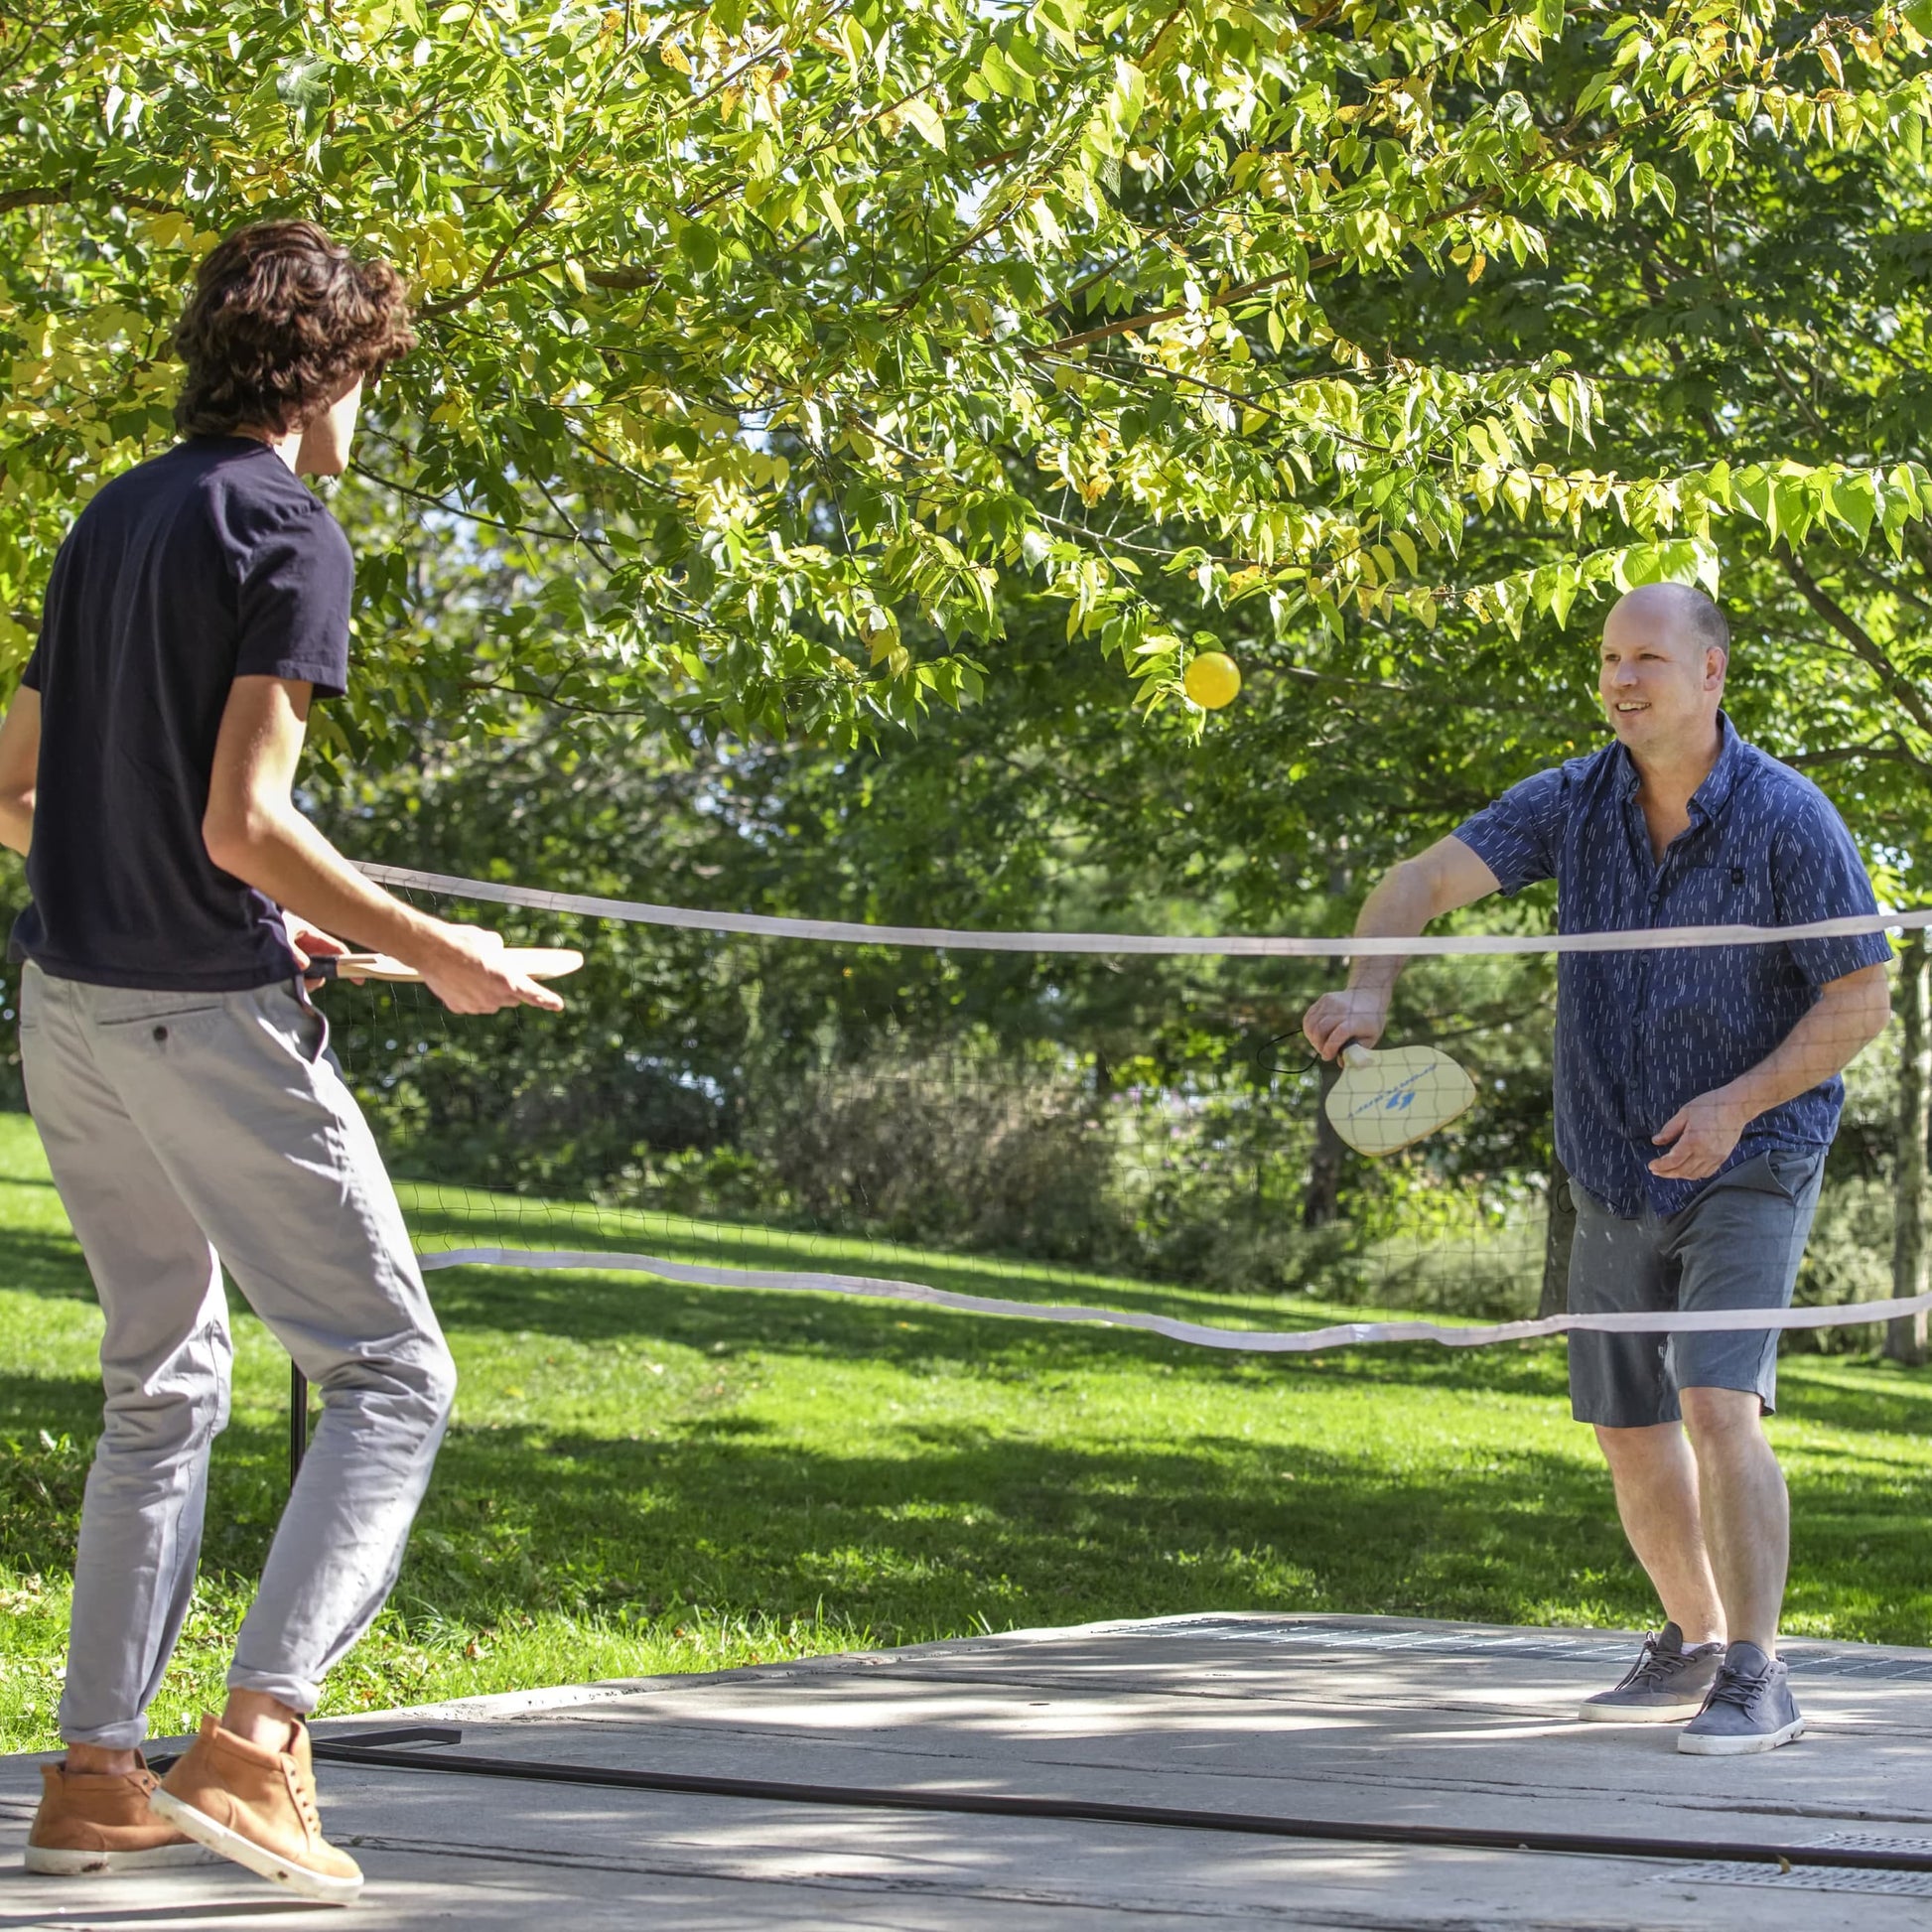 Sportcraft PickleBall Set - Lifestyle Image - Father & Son playing PickleBall outside in park